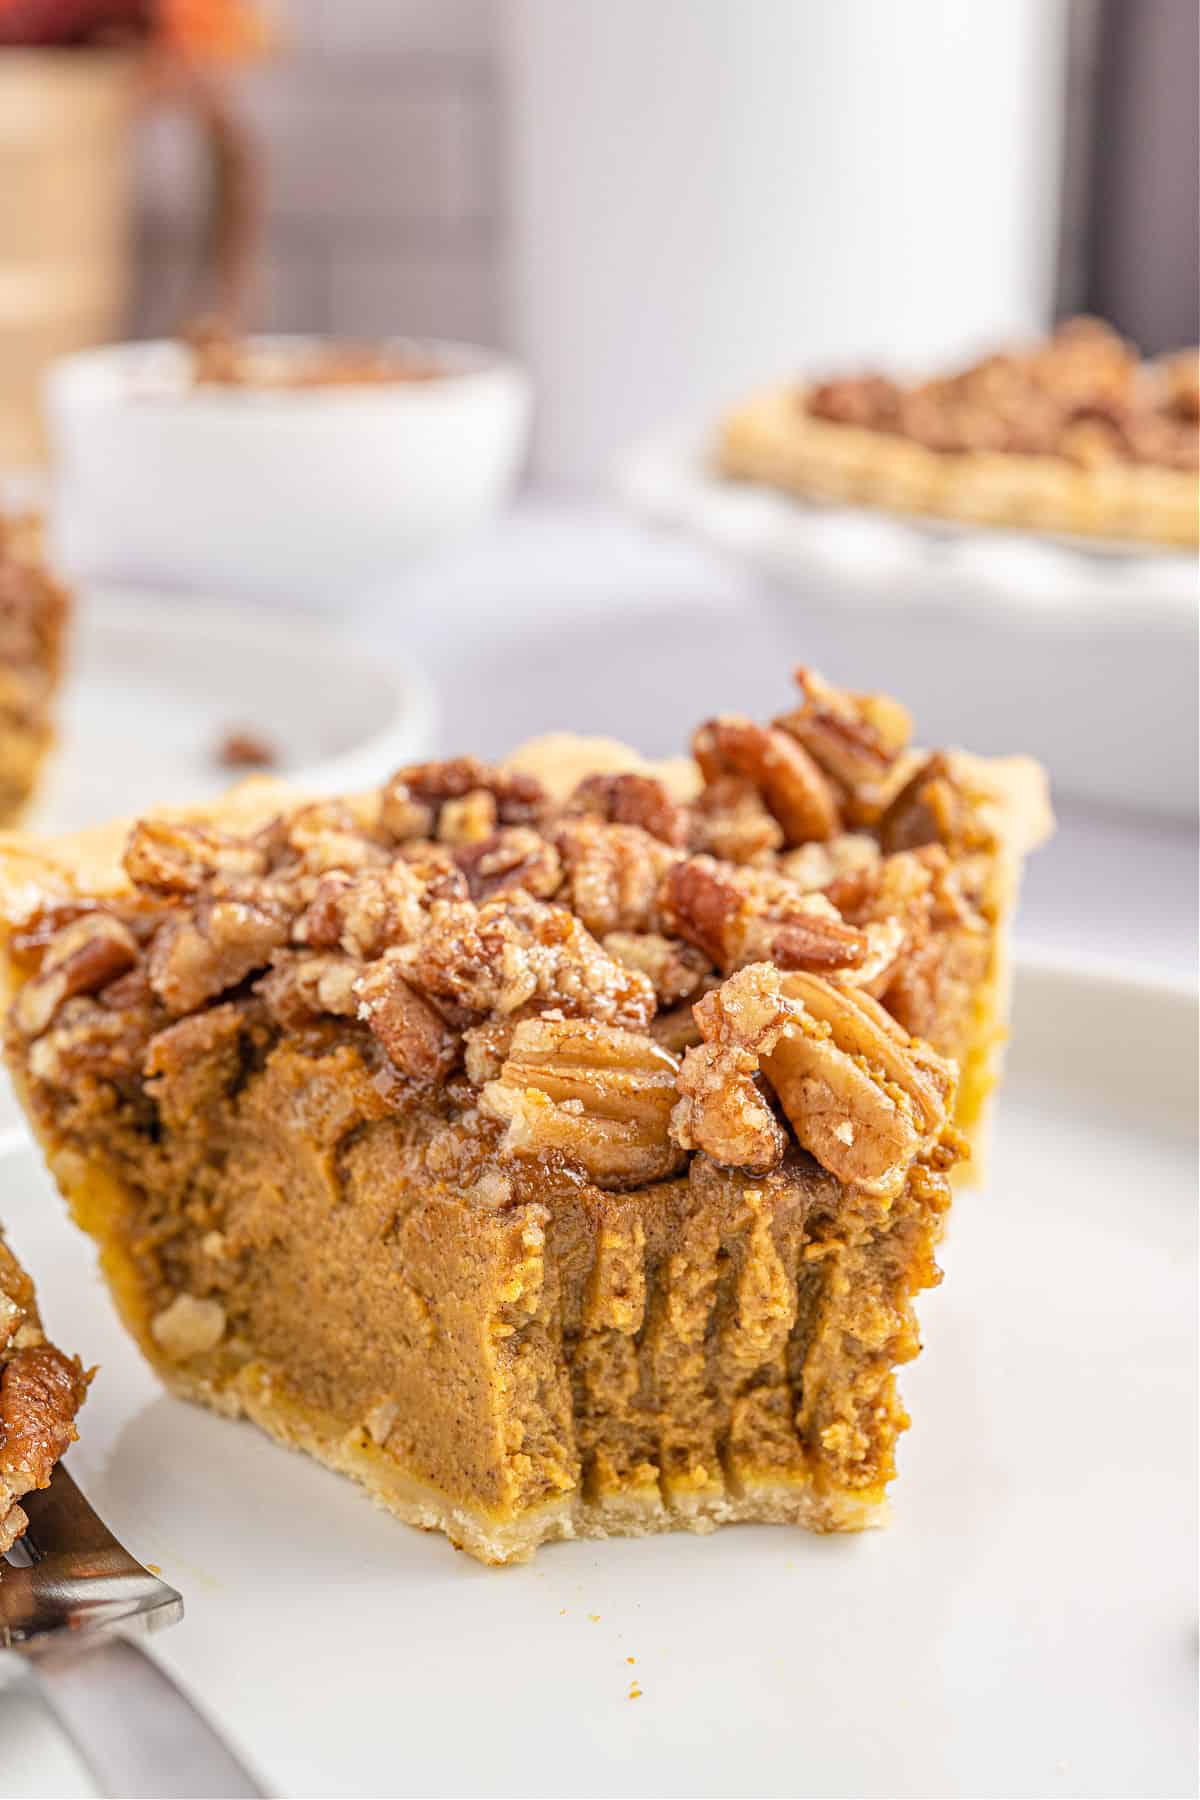 Slice of pumpkin pecan pie with a bite removed.